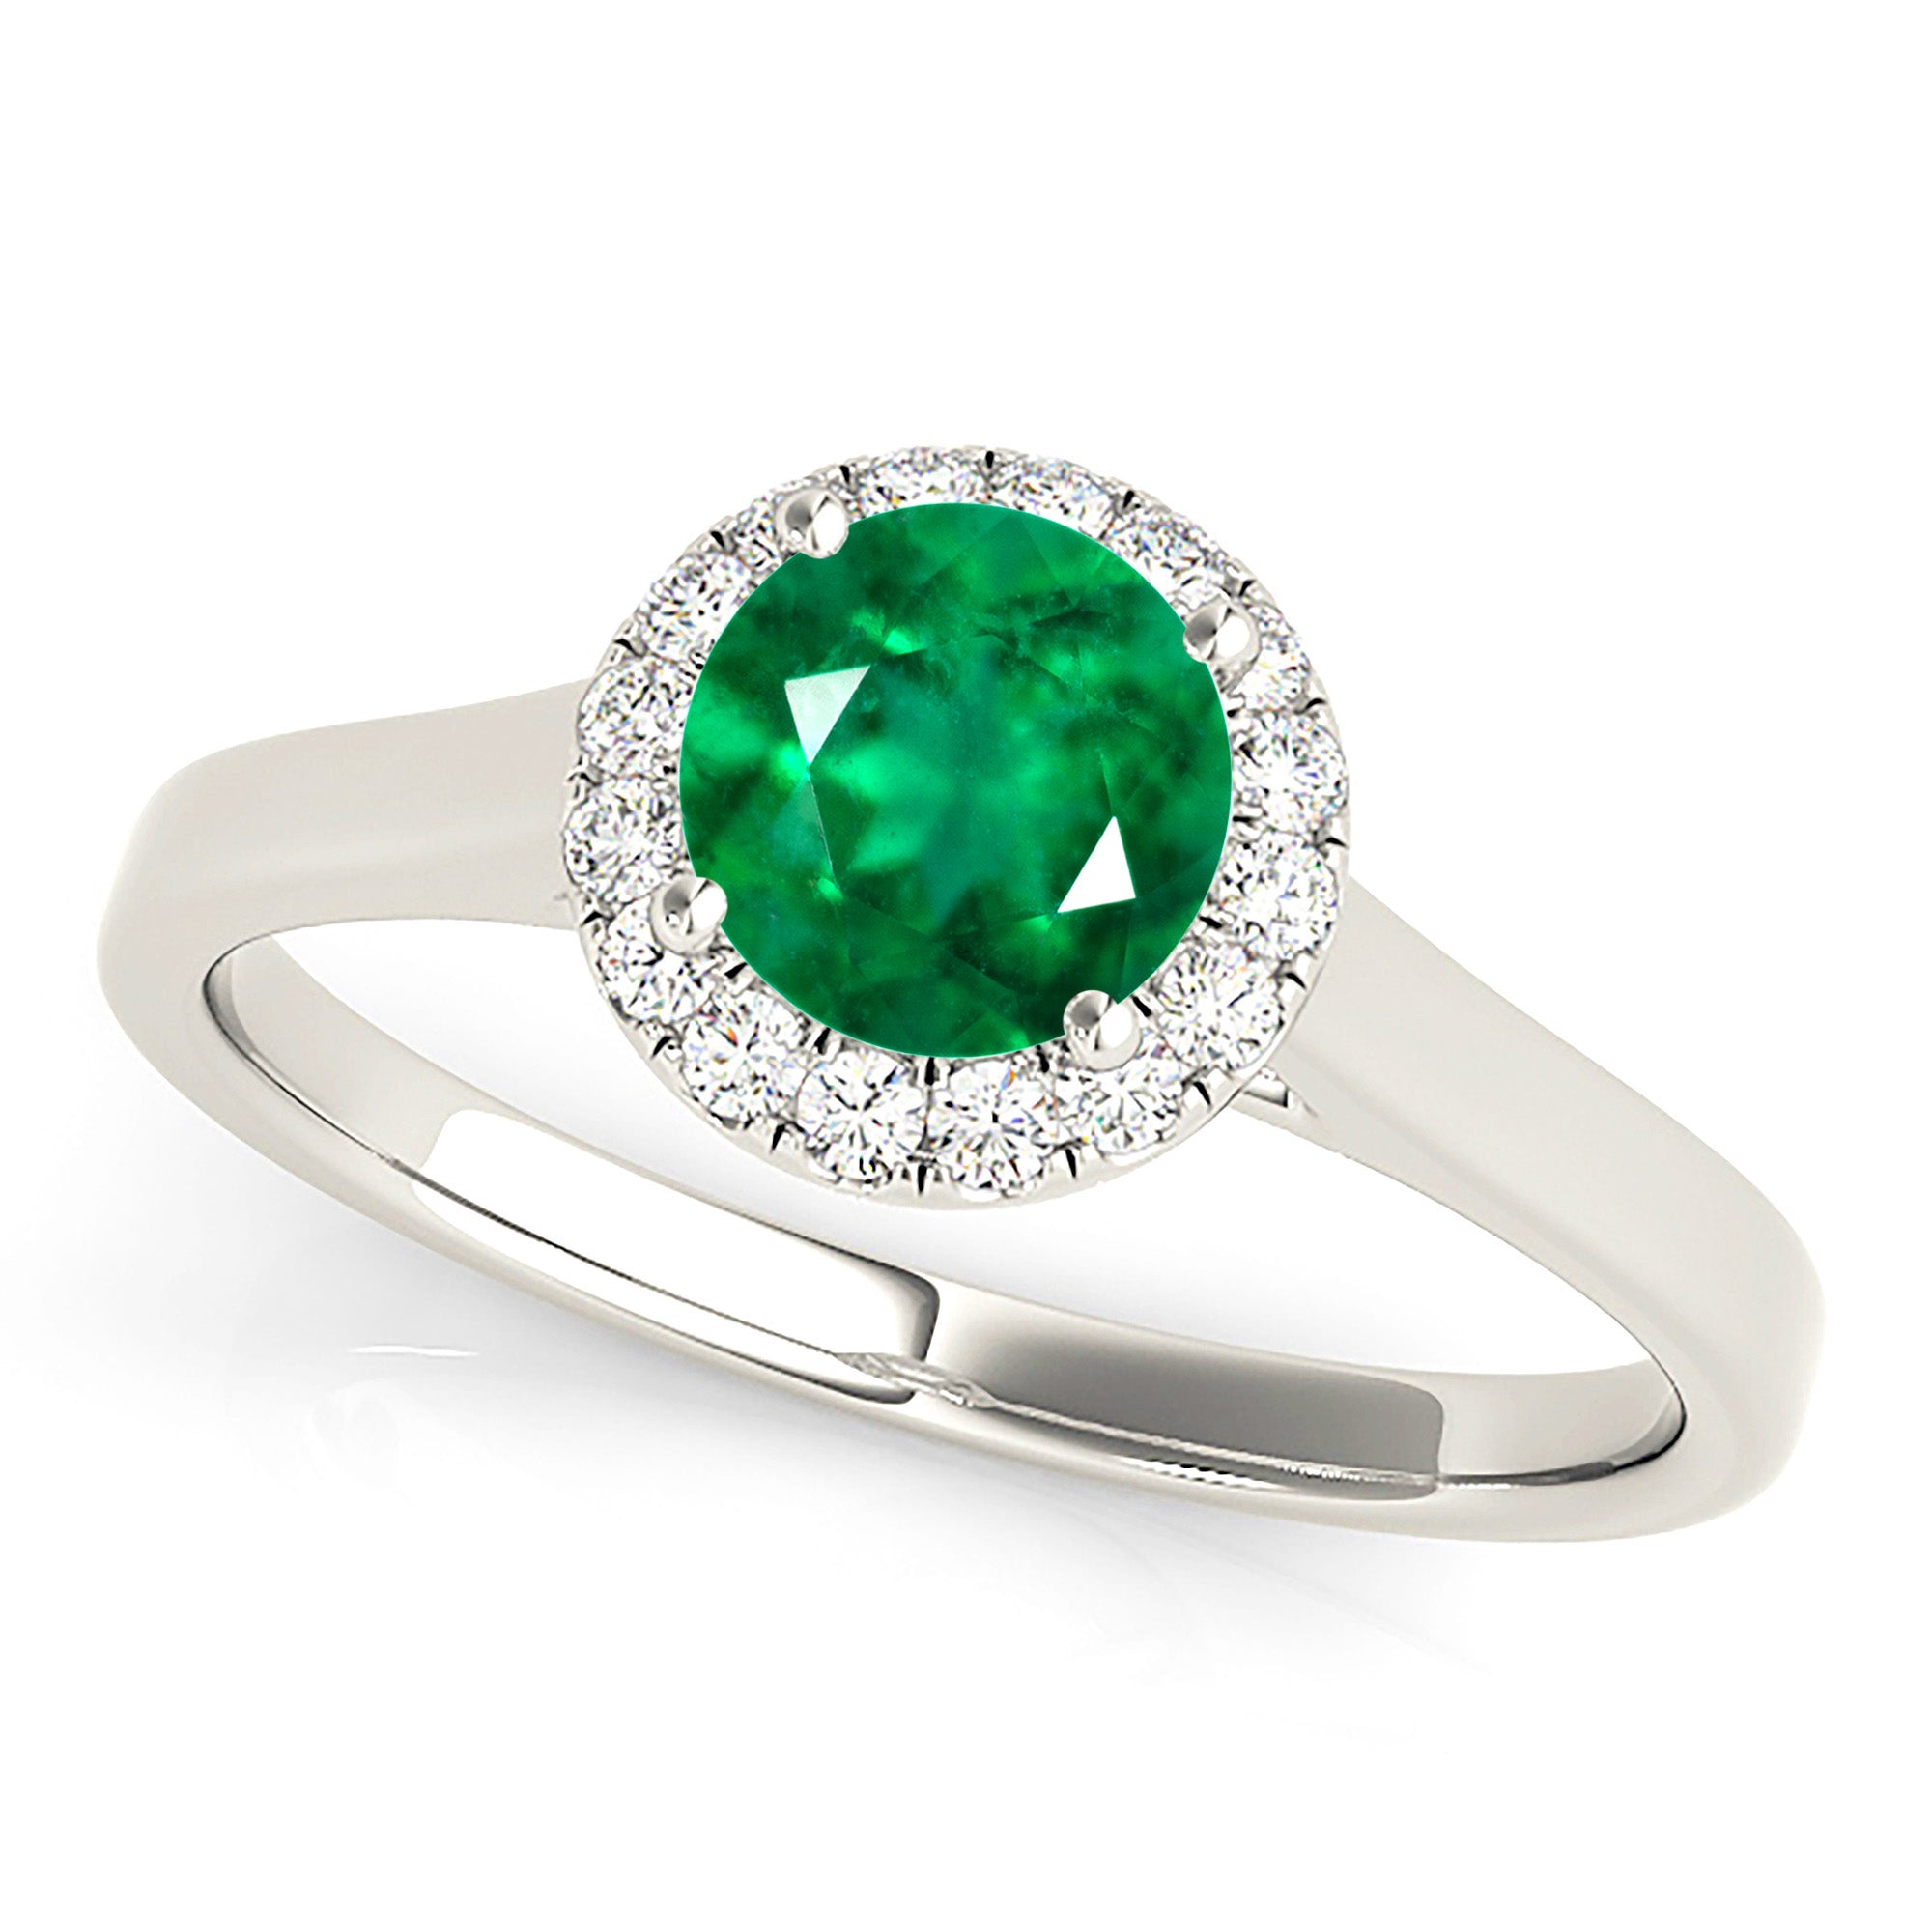 1.14 ct. Genuine Emerald Ring With 0.10 ctw. Diamond Halo And Solid Gold Shank-in 14K/18K White, Yellow, Rose Gold and Platinum - Christmas Jewelry Gift -VIRABYANI